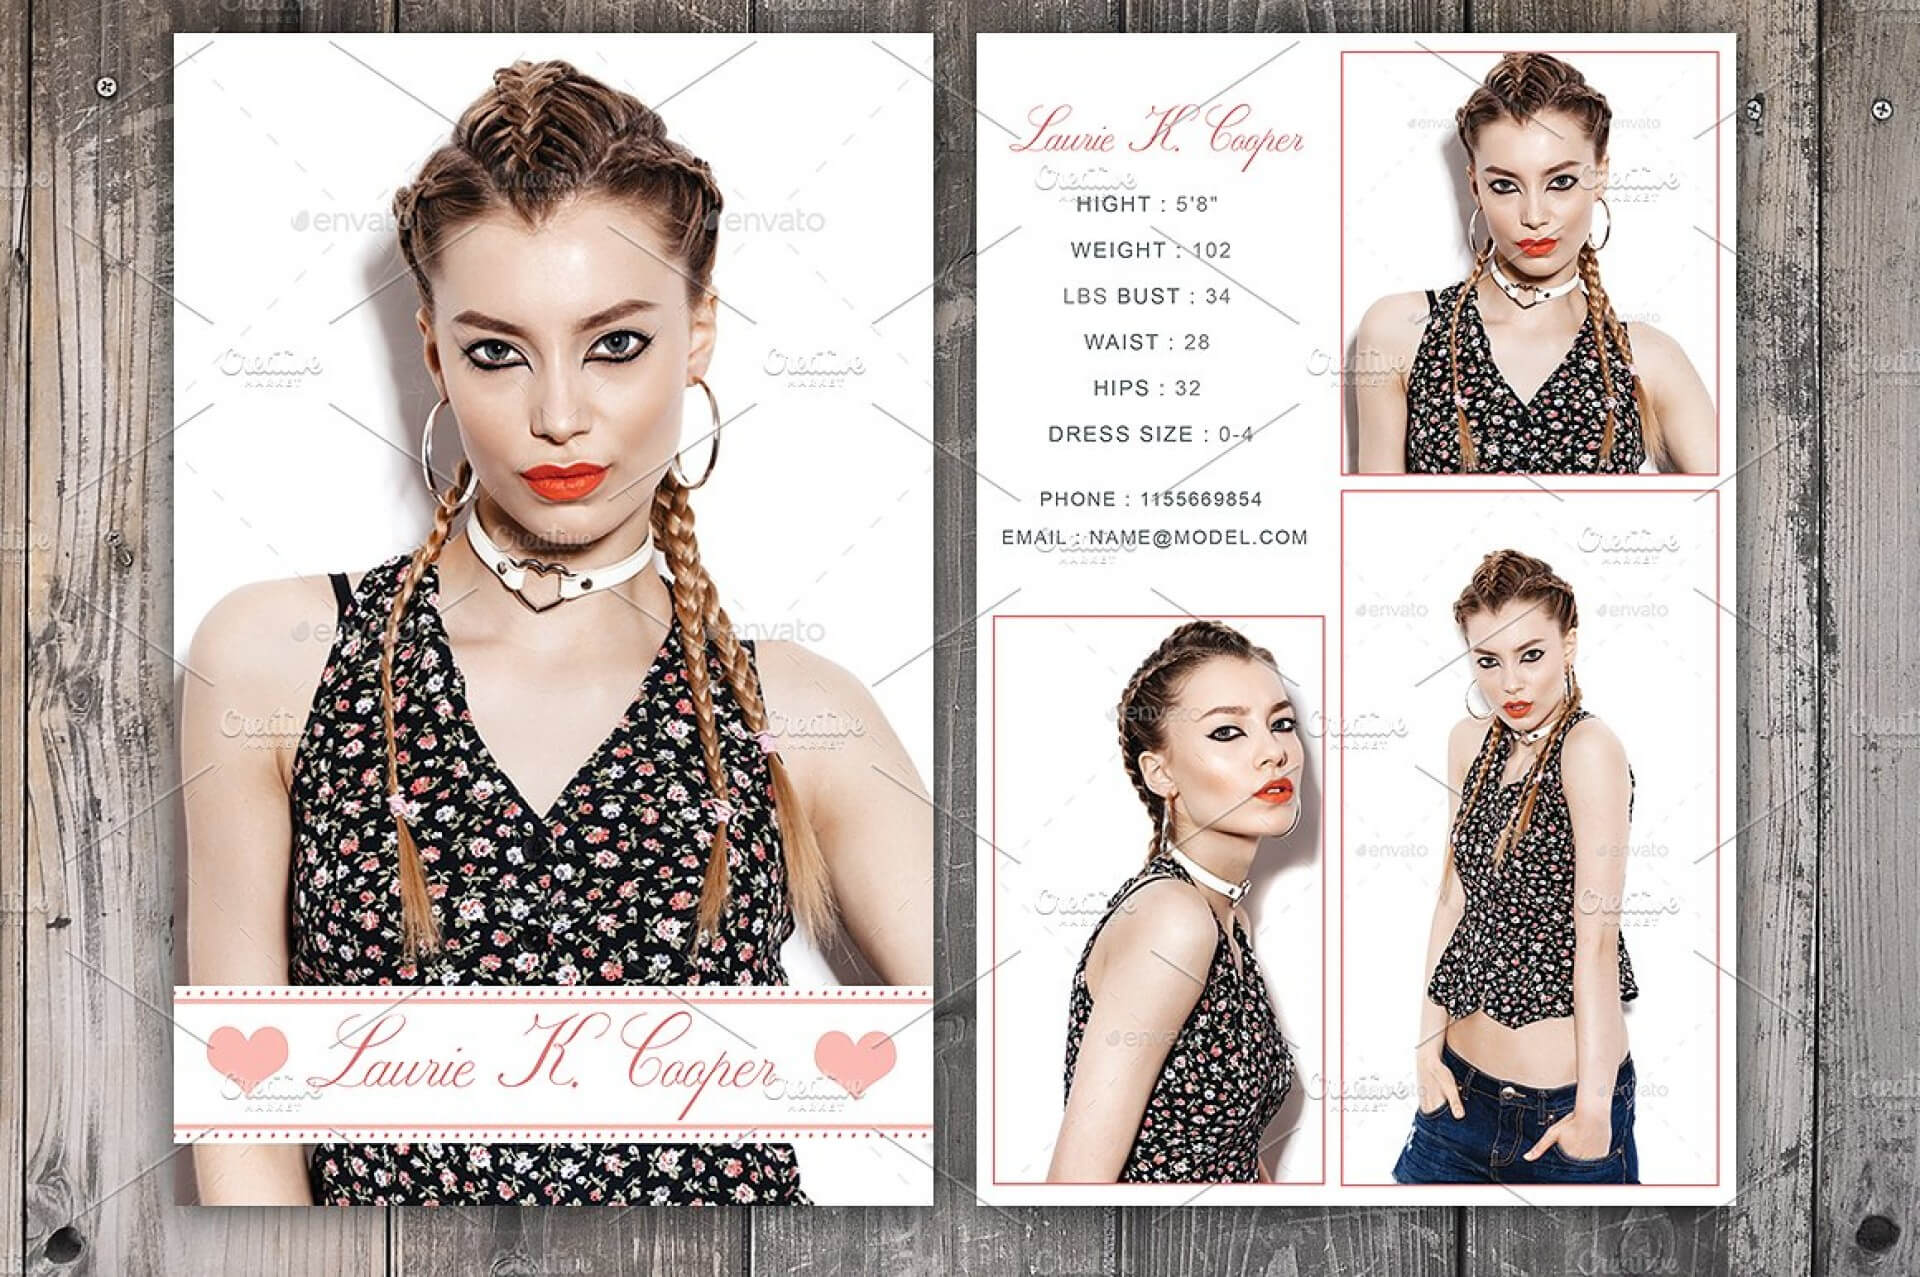 005 Model Comp Card Template Ideas Outstanding Photoshop For Free Zed Card Template